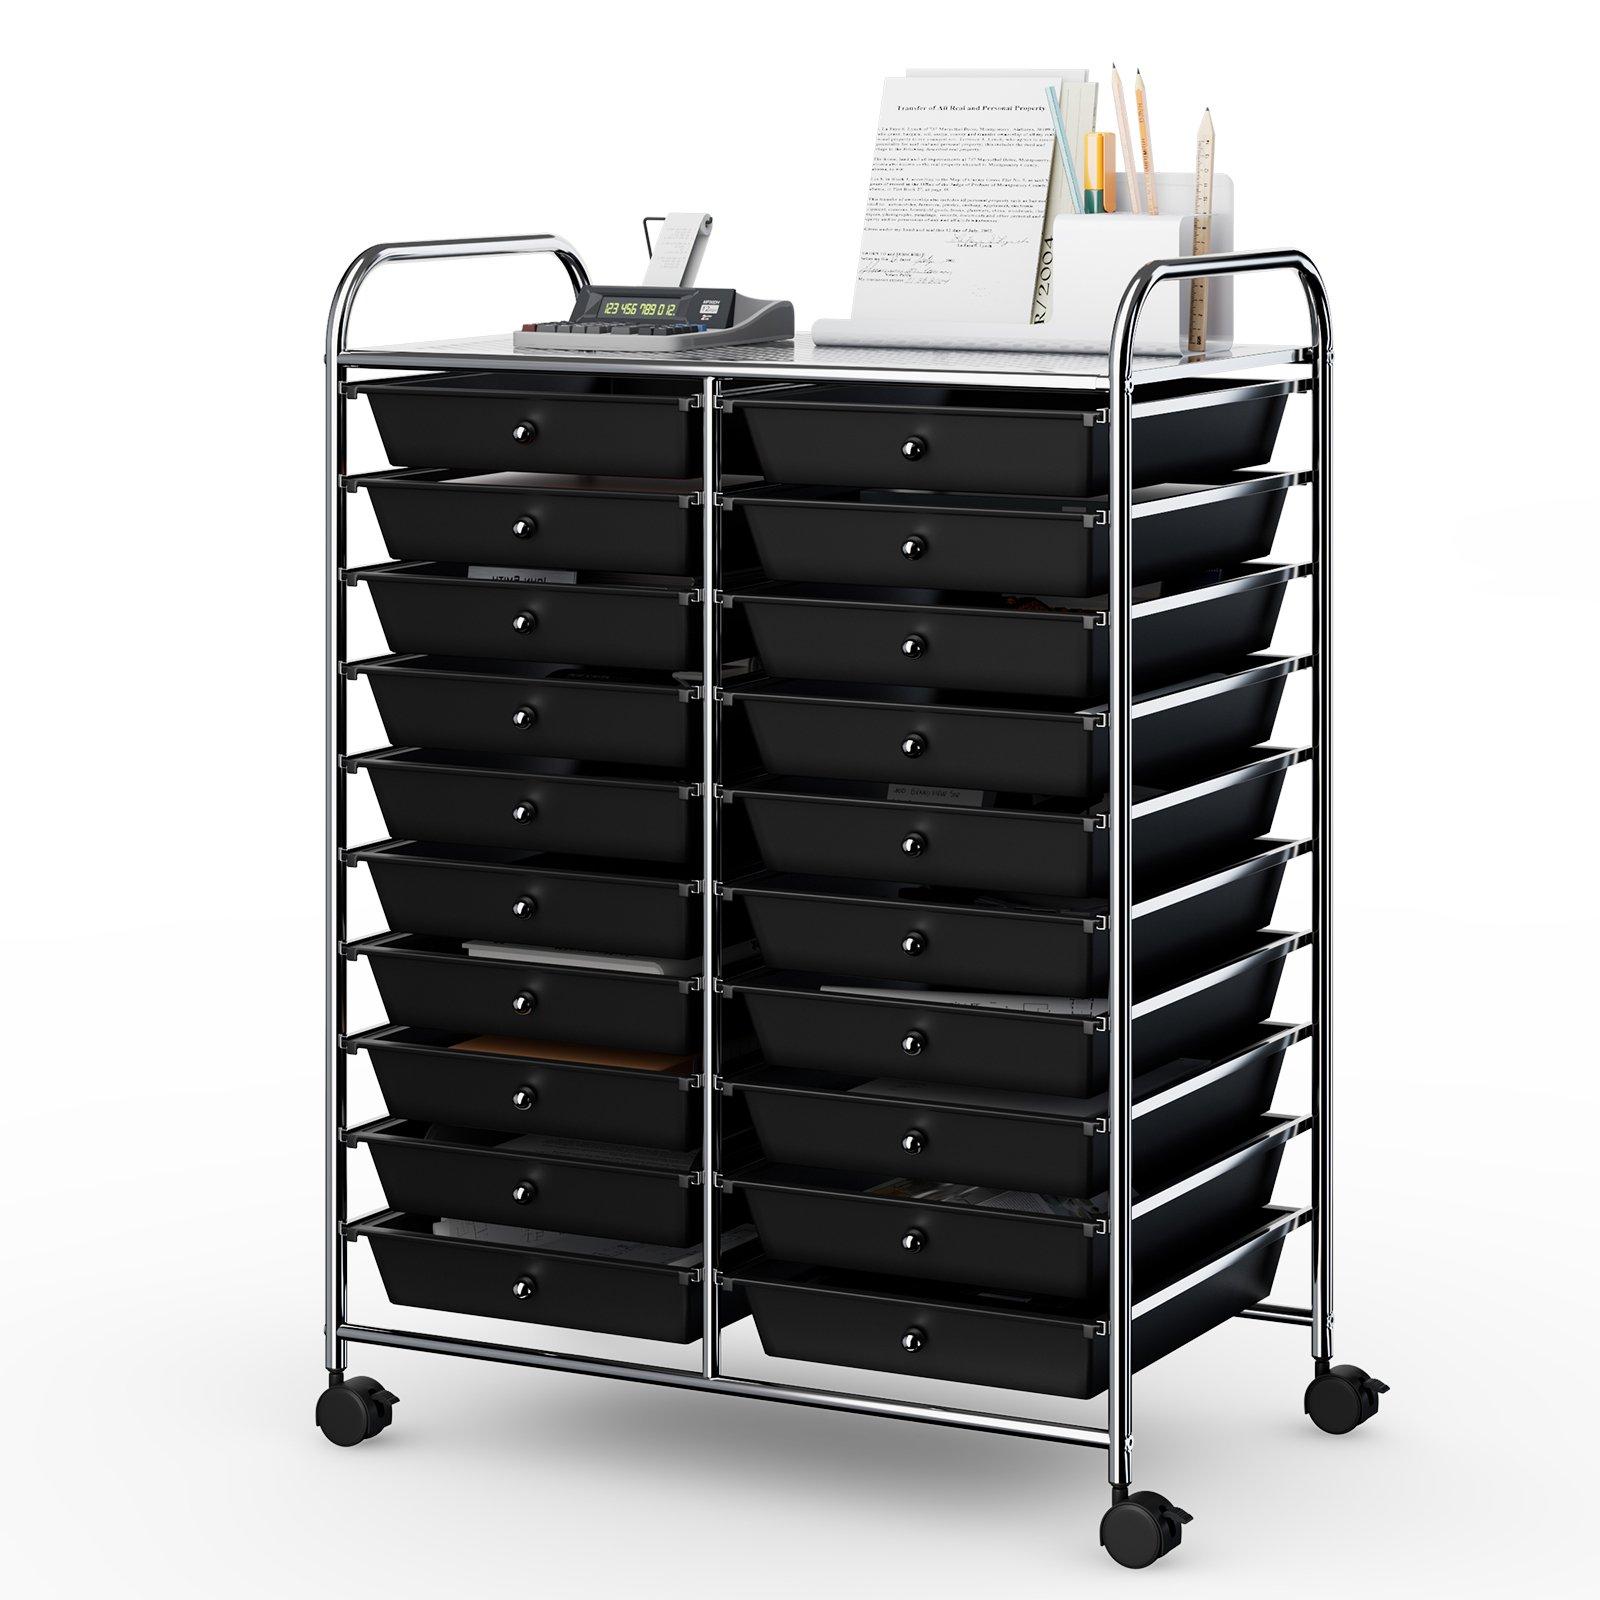 20 Drawers Storage Rolling Cart Home Office Mobile Utility Trolley Organizer